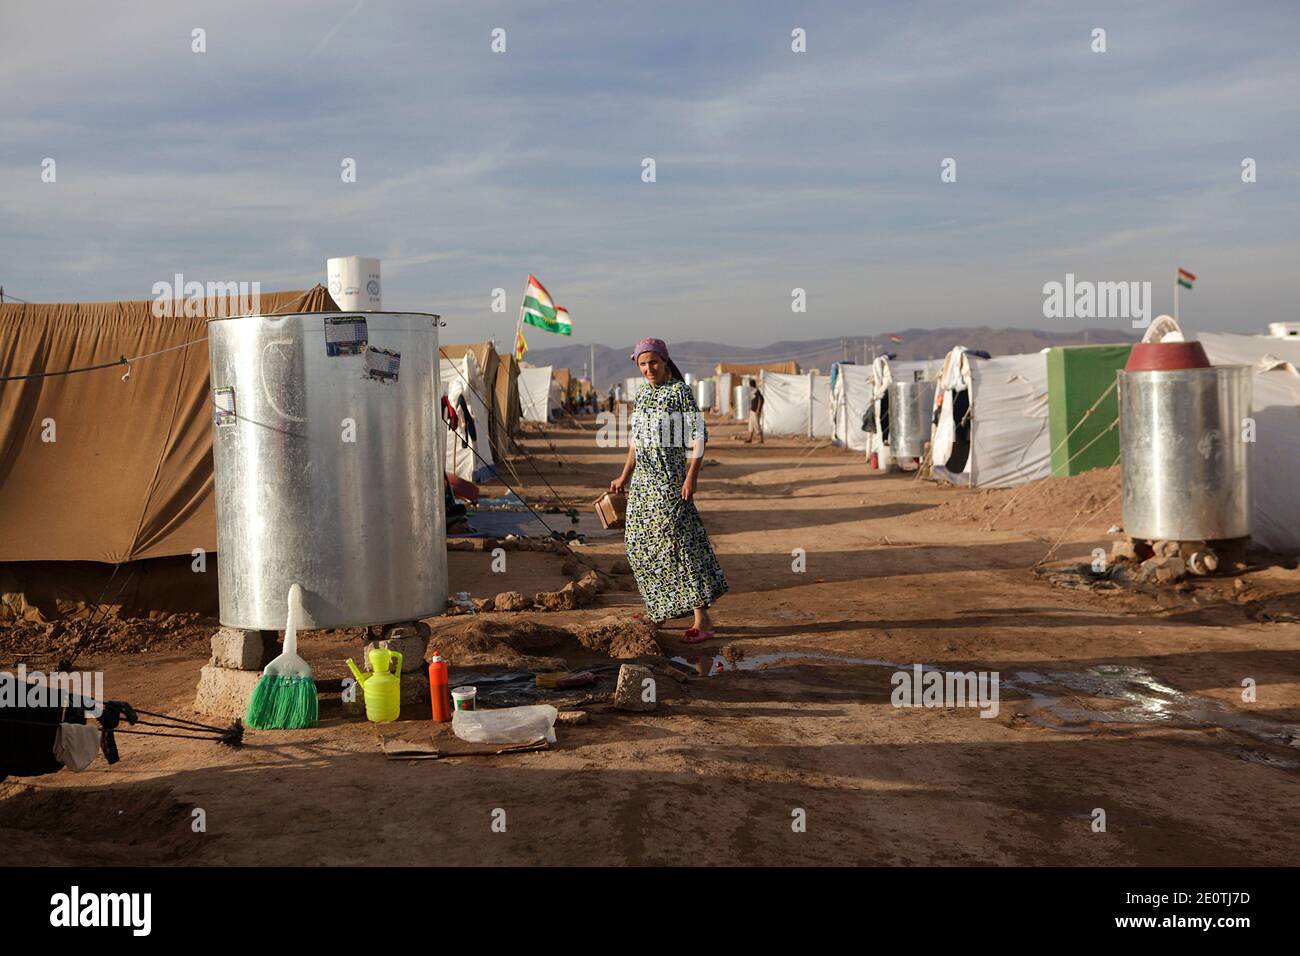 A view of the Domiz refugee camp near Dohuk, Iraq, on October 15, 2012. Actually 15000 Syrian refugees from the Kurdish region of north-eastern Syria living in this camp. Photo by Axelle De Russe/ABACAPRESS.COM Stock Photo